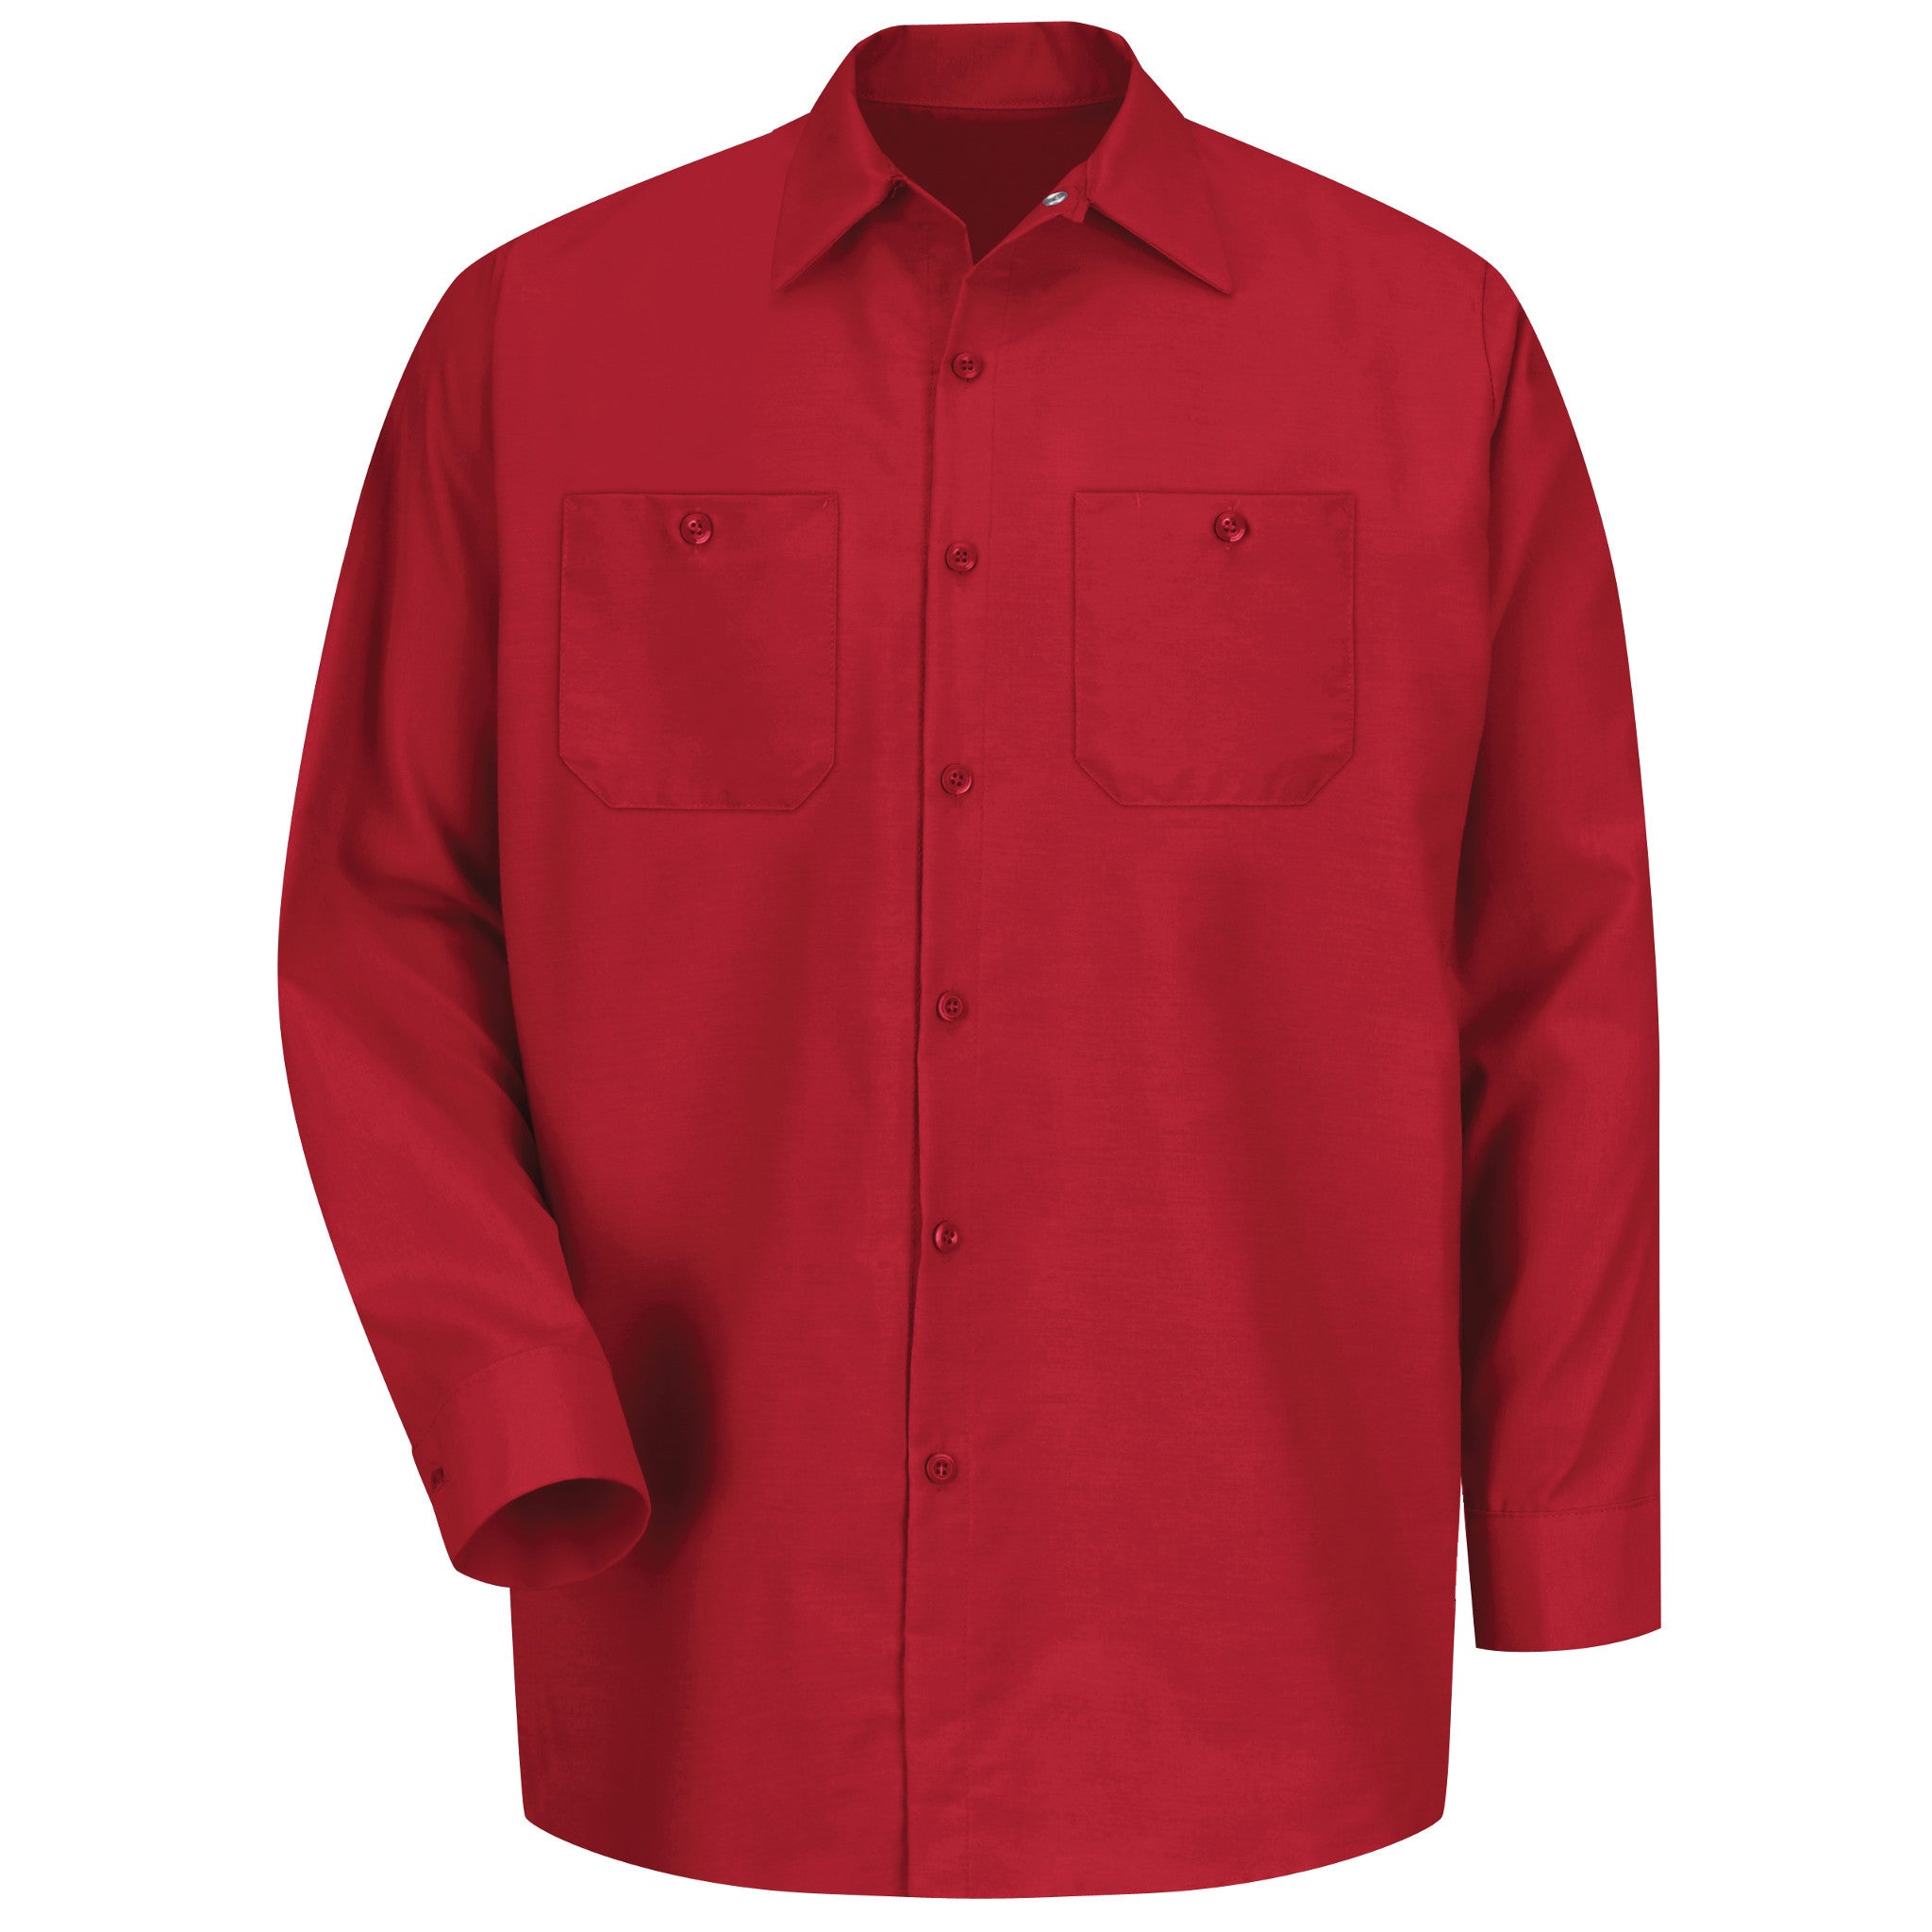 Red Kap Industrial Solid Work Shirt - SP14 (5th color)